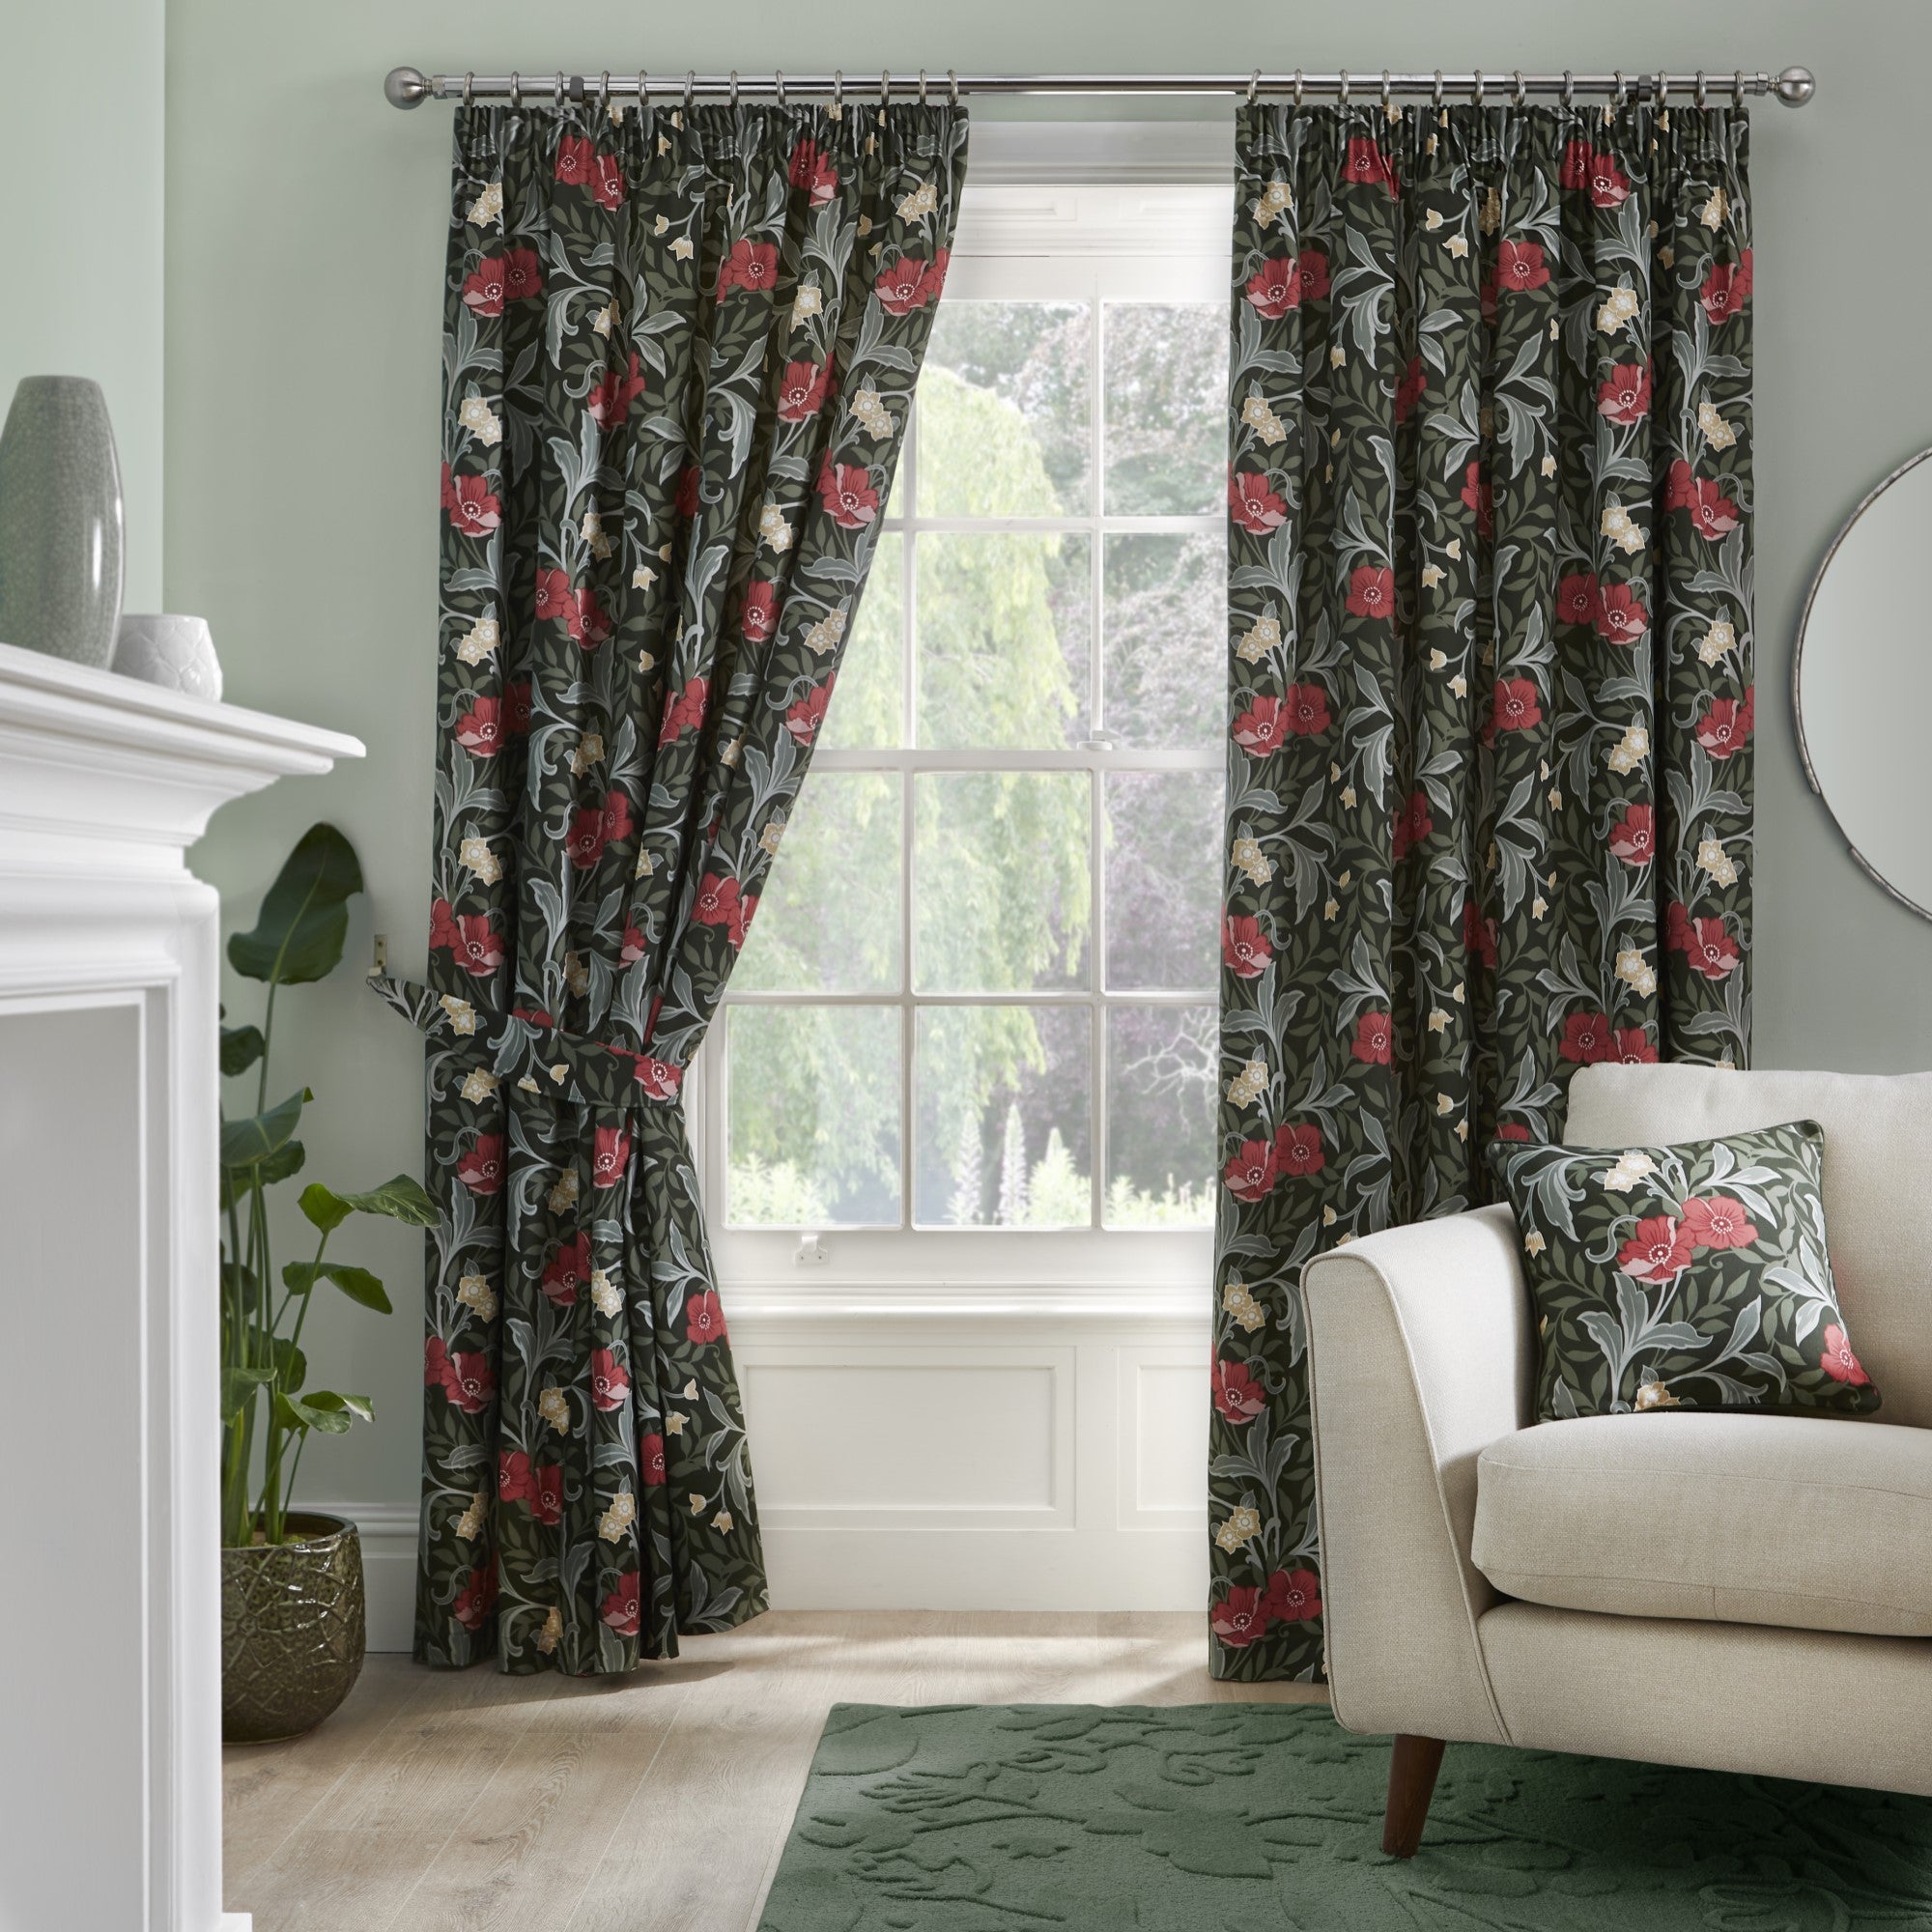 Pair of Pencil Pleat Curtains With Tie-Backs Sandringham by D&D in Green